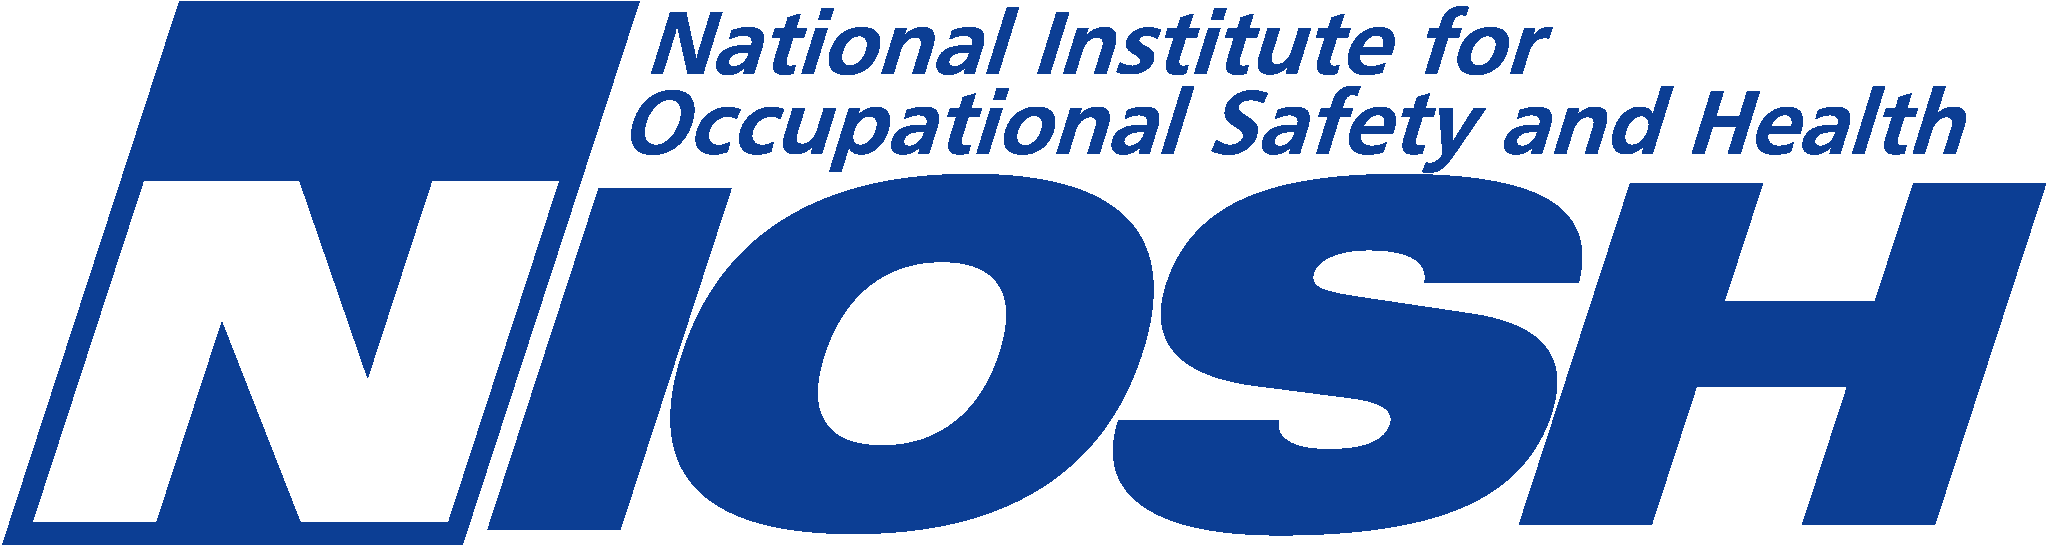 The National Institute for Occupational Safety and Health (NIOSH)